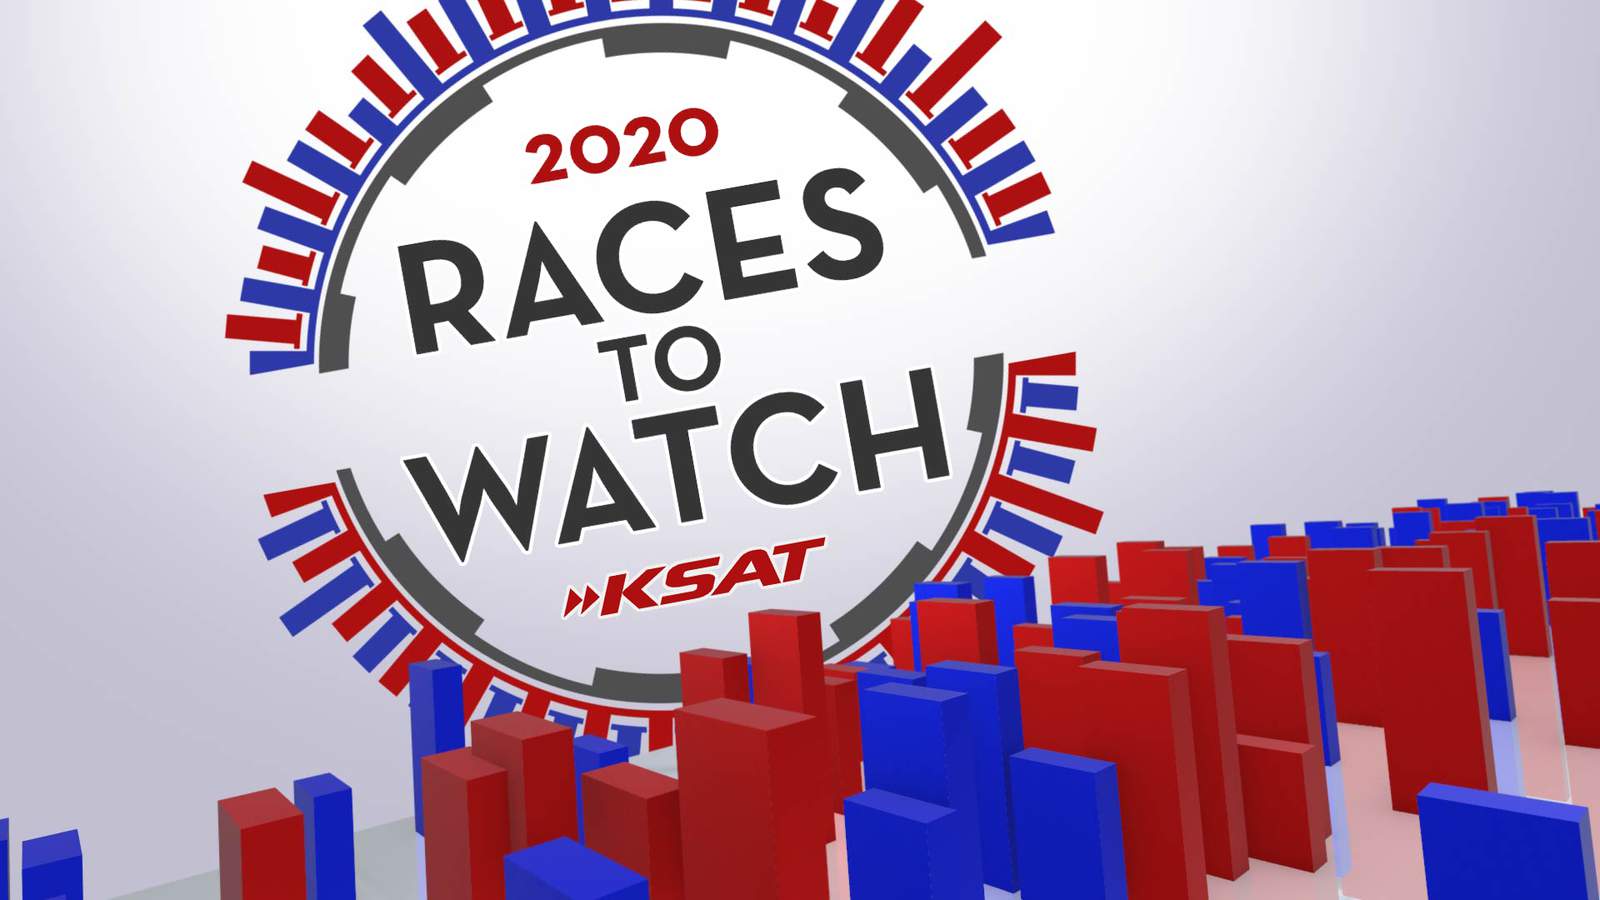 Key races to watch in 2020 election in Bexar County